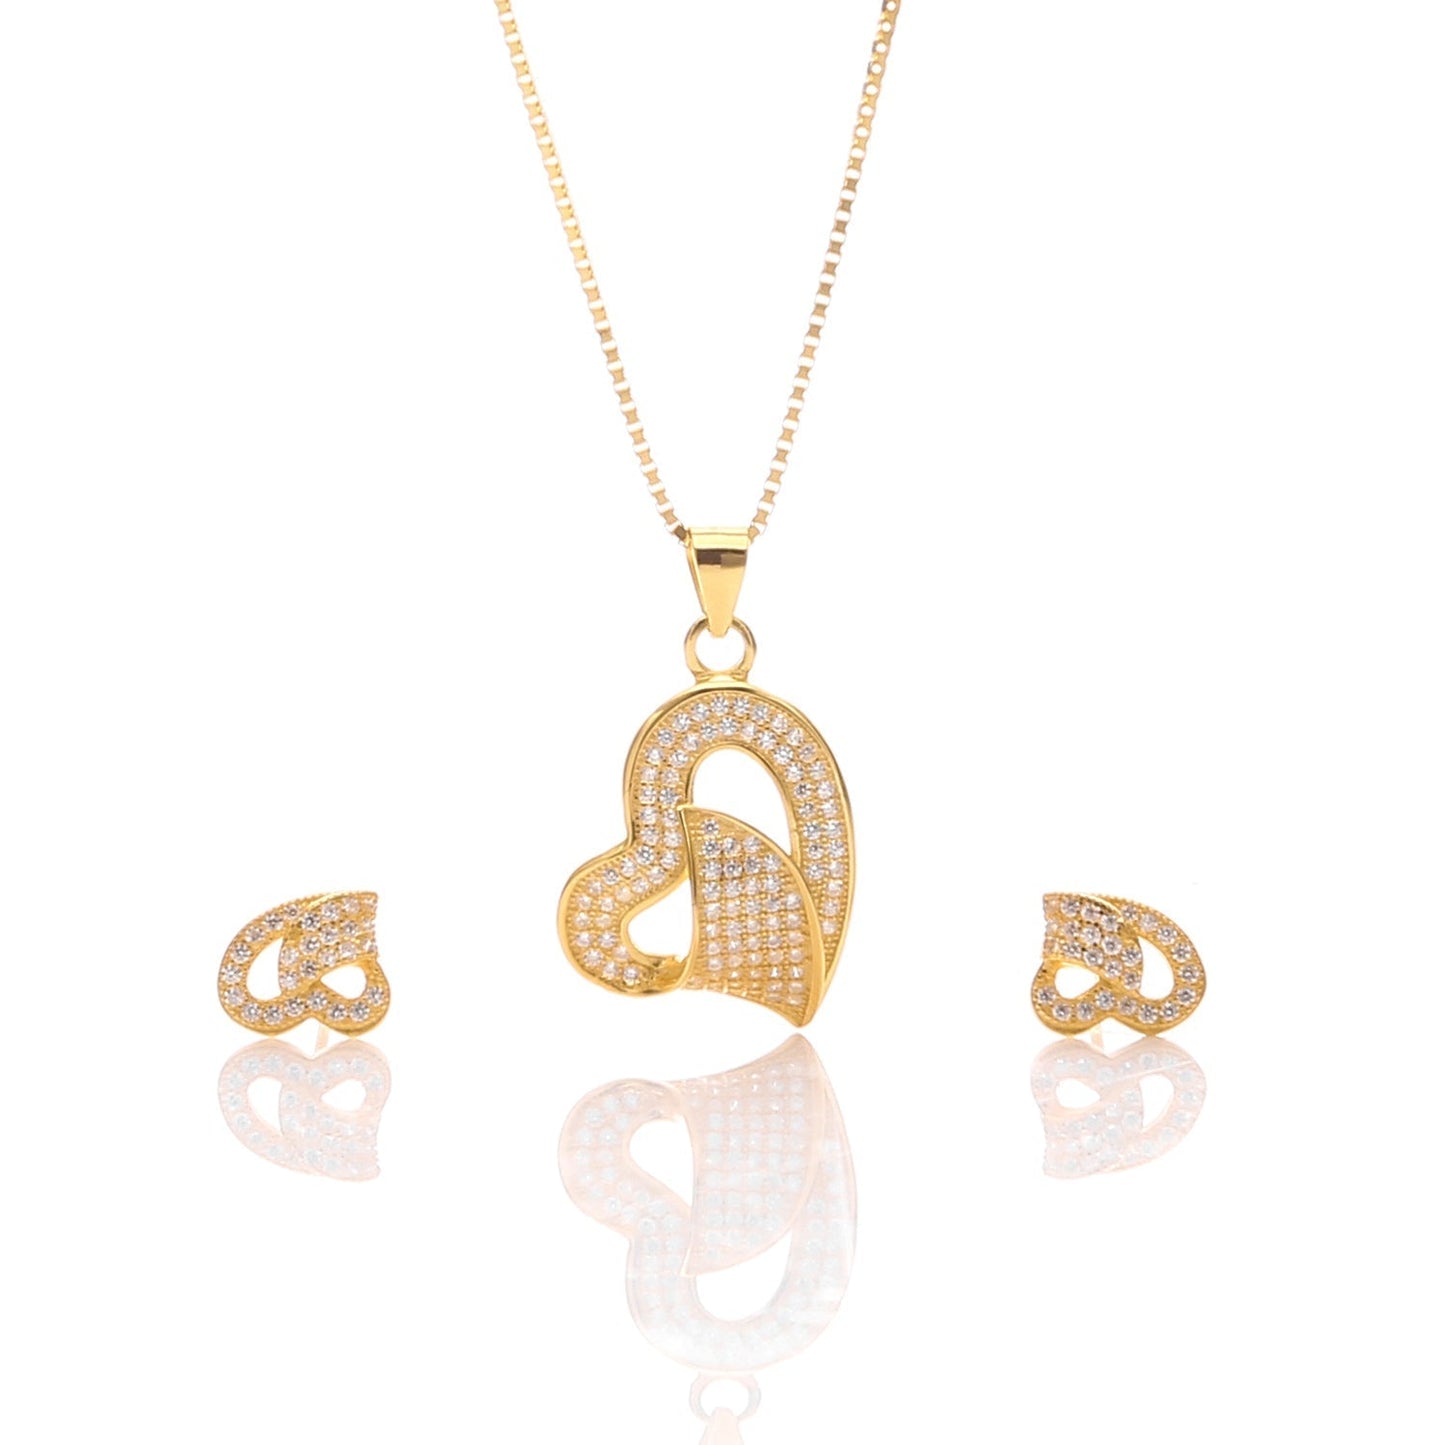 Classic One Sided Bent Heart Shaped Pendant Necklace and Earrings Set - ARJW1014GD ARCADIO